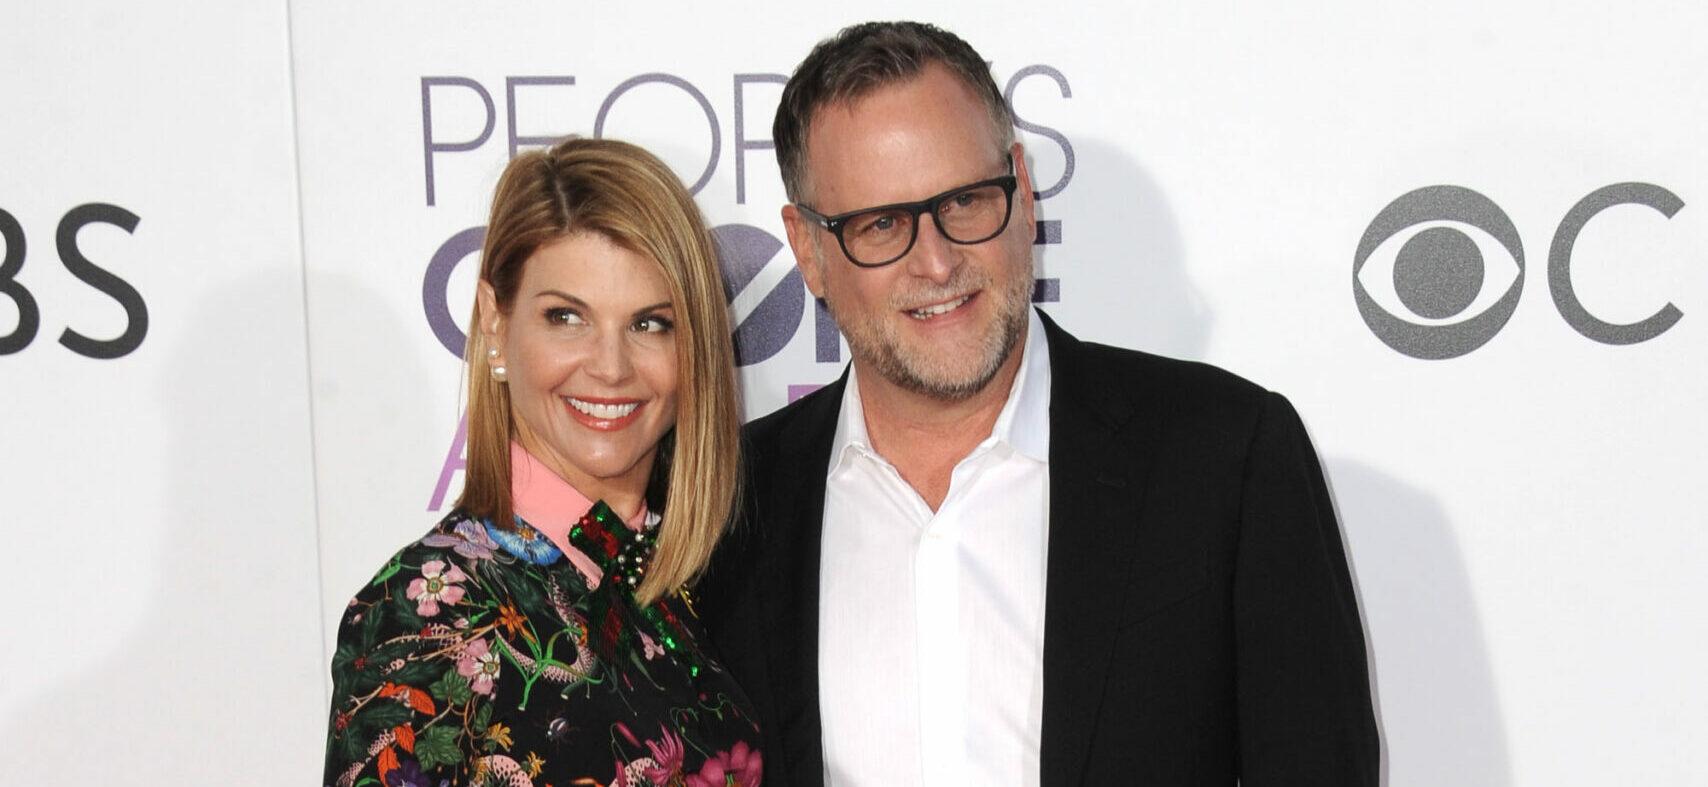 Celebrities attend The 43rd People's Choice Awards in Los Angeles, CA. 18 Jan 2017 Pictured: Lori Loughlin, Dave Coulier.